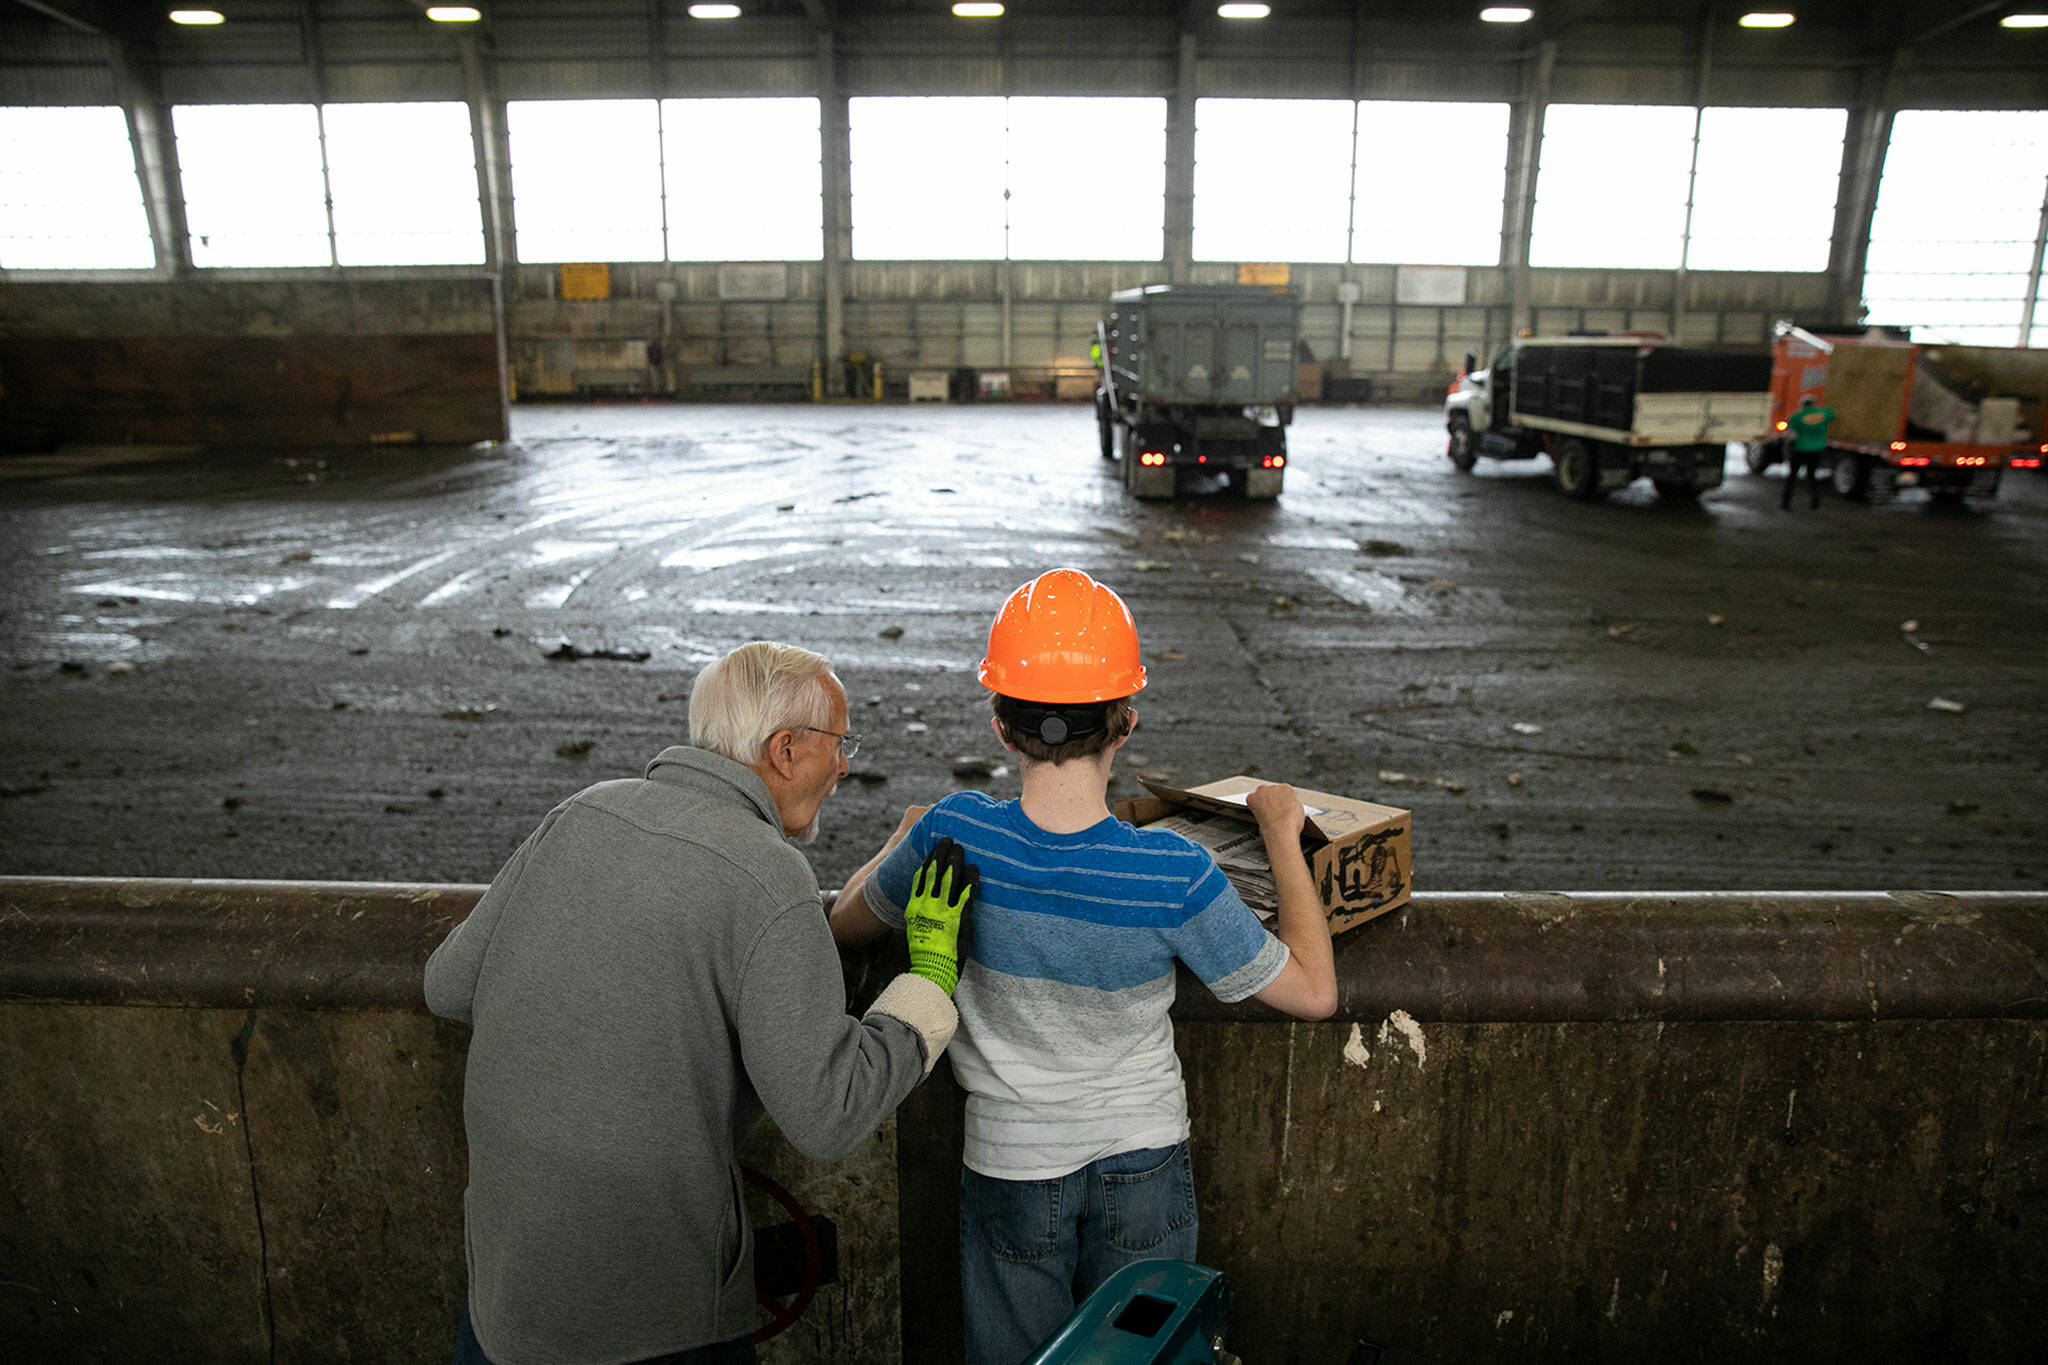 Joel Christensen, who was born with Infantile Refsum disease, causing him to be unable to see or fully hear, stands with his grandfather Harold at his side as he tosses trash into the pit at the Airport Road Recycling & Transfer Station in Everett. Going to the transfer station is one of Joel’s favorite activities with the vibration of humming machinery, the whooshing of front-end loaders and the tactile nature of his family’s trash all stimulating his strongest senses. (Ryan Berry / The Herald)